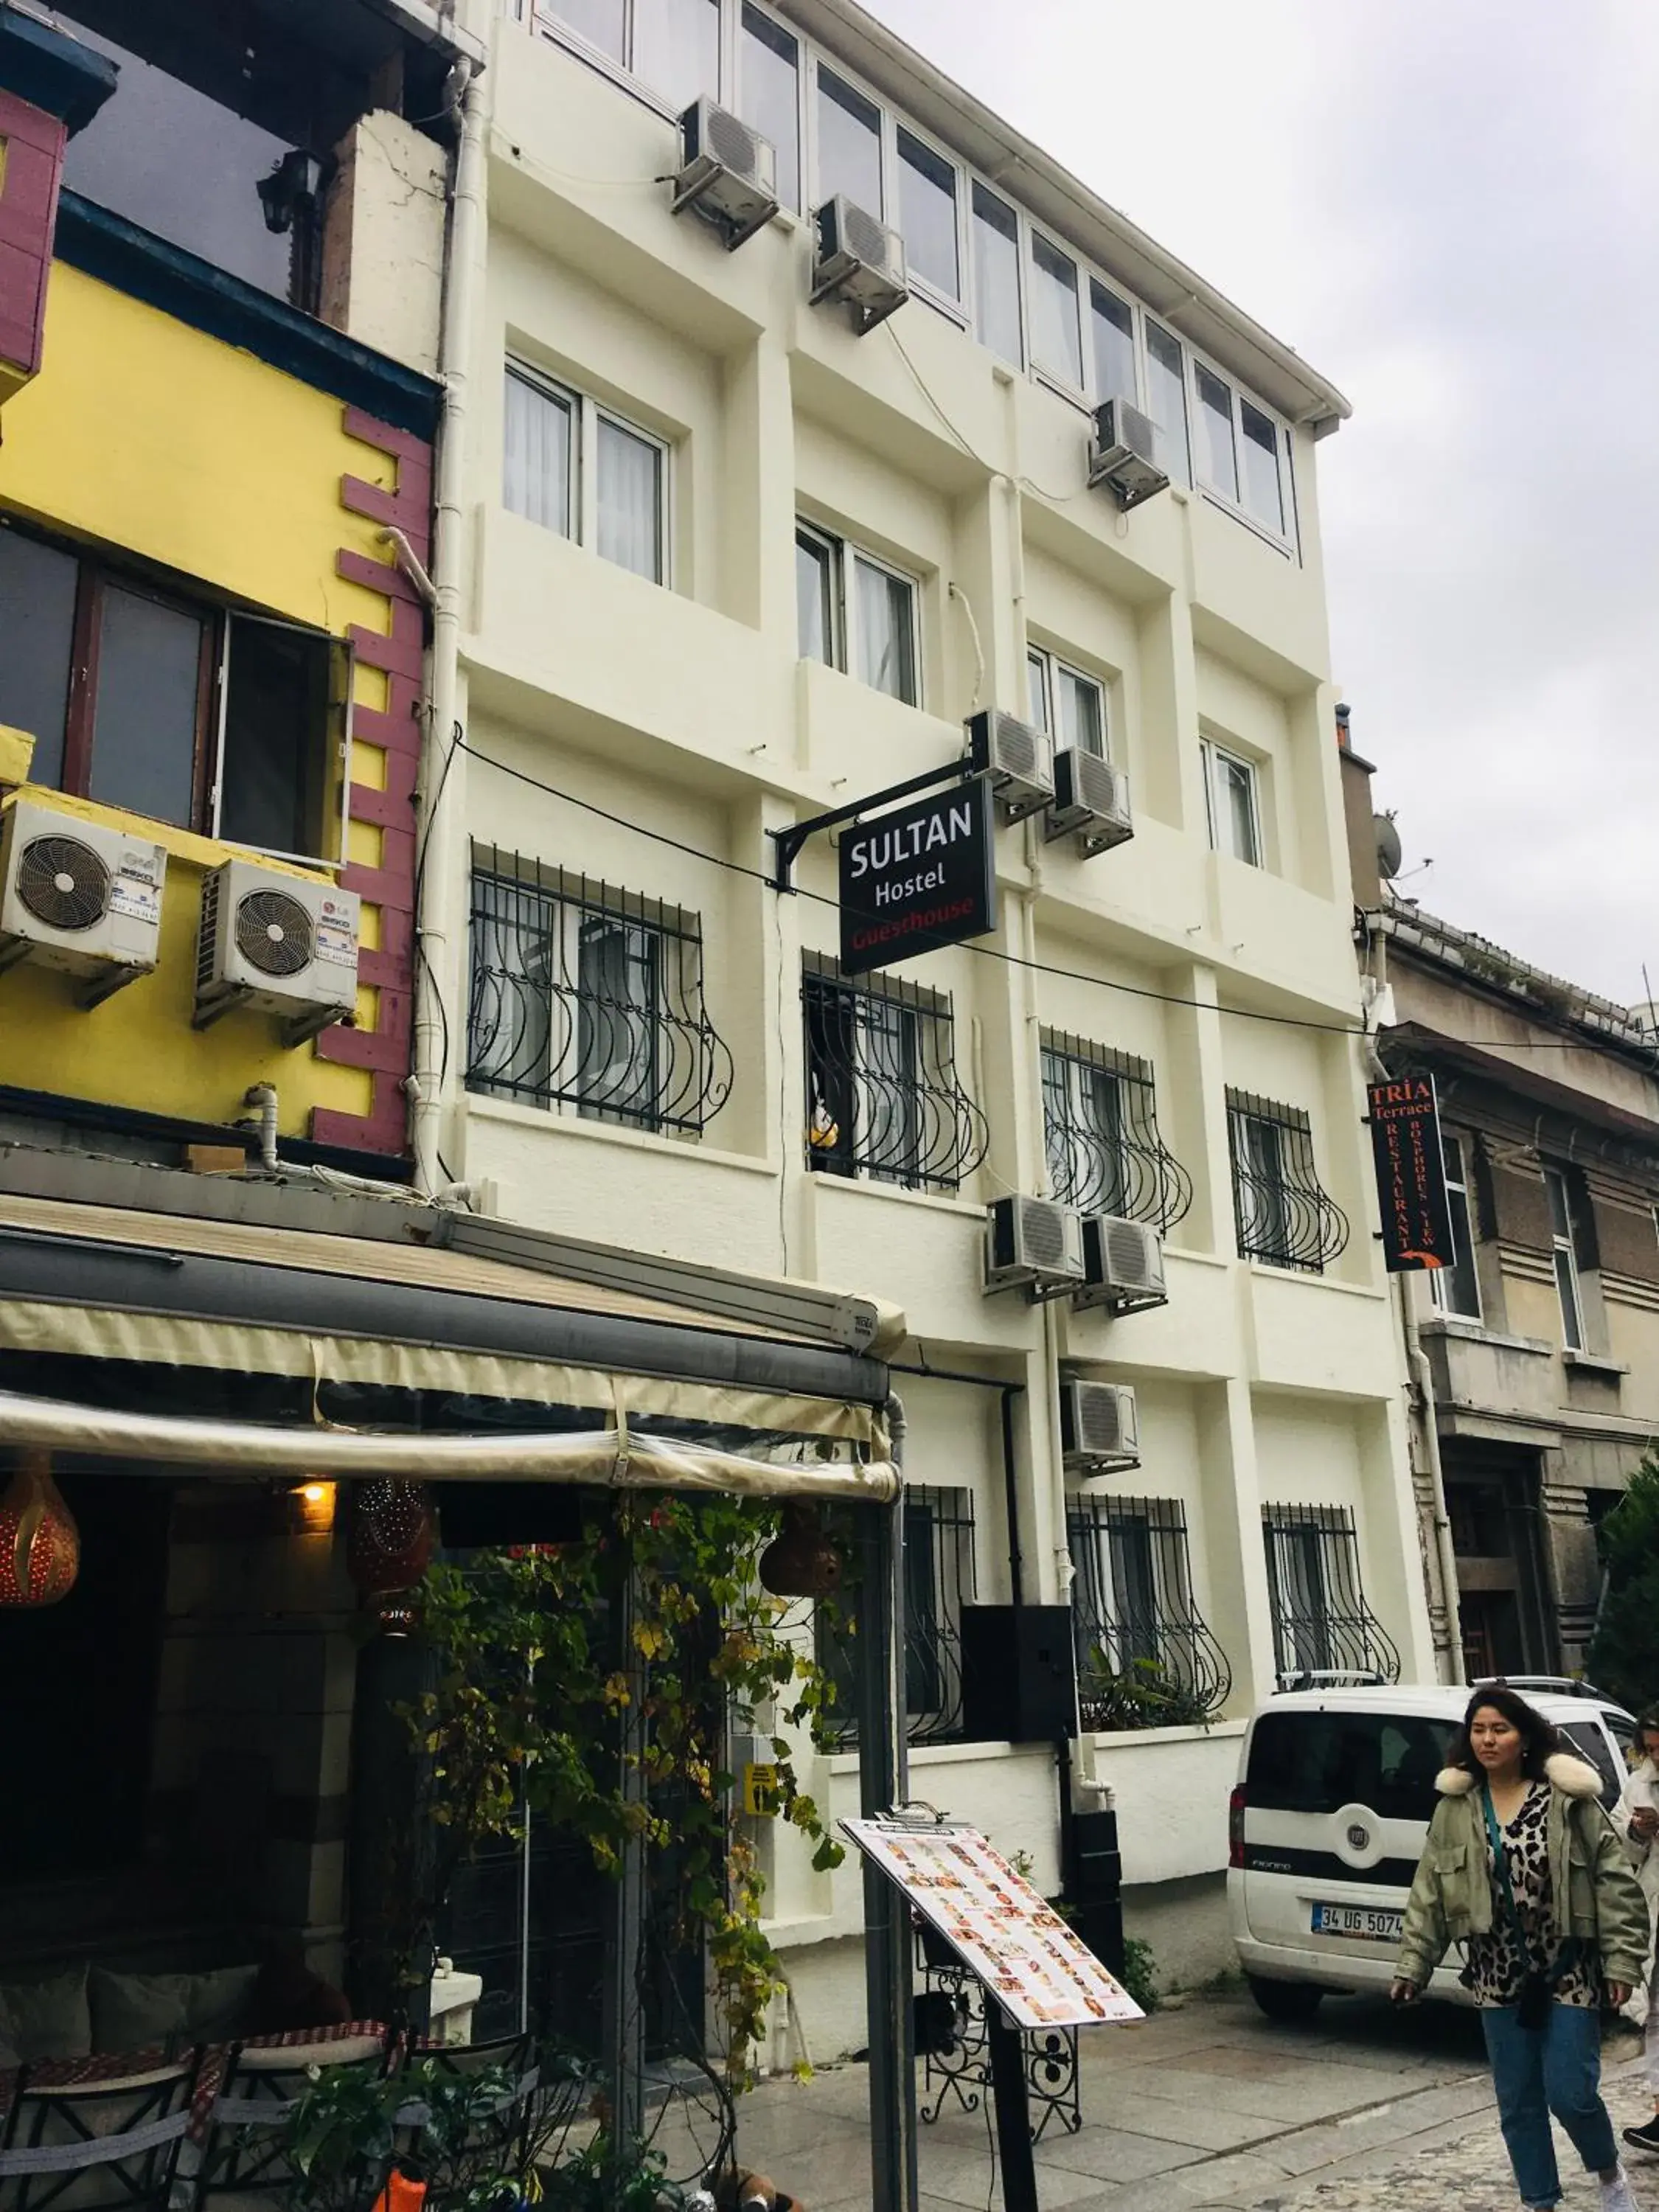 Property Building in Sultan Hostel&Guest House